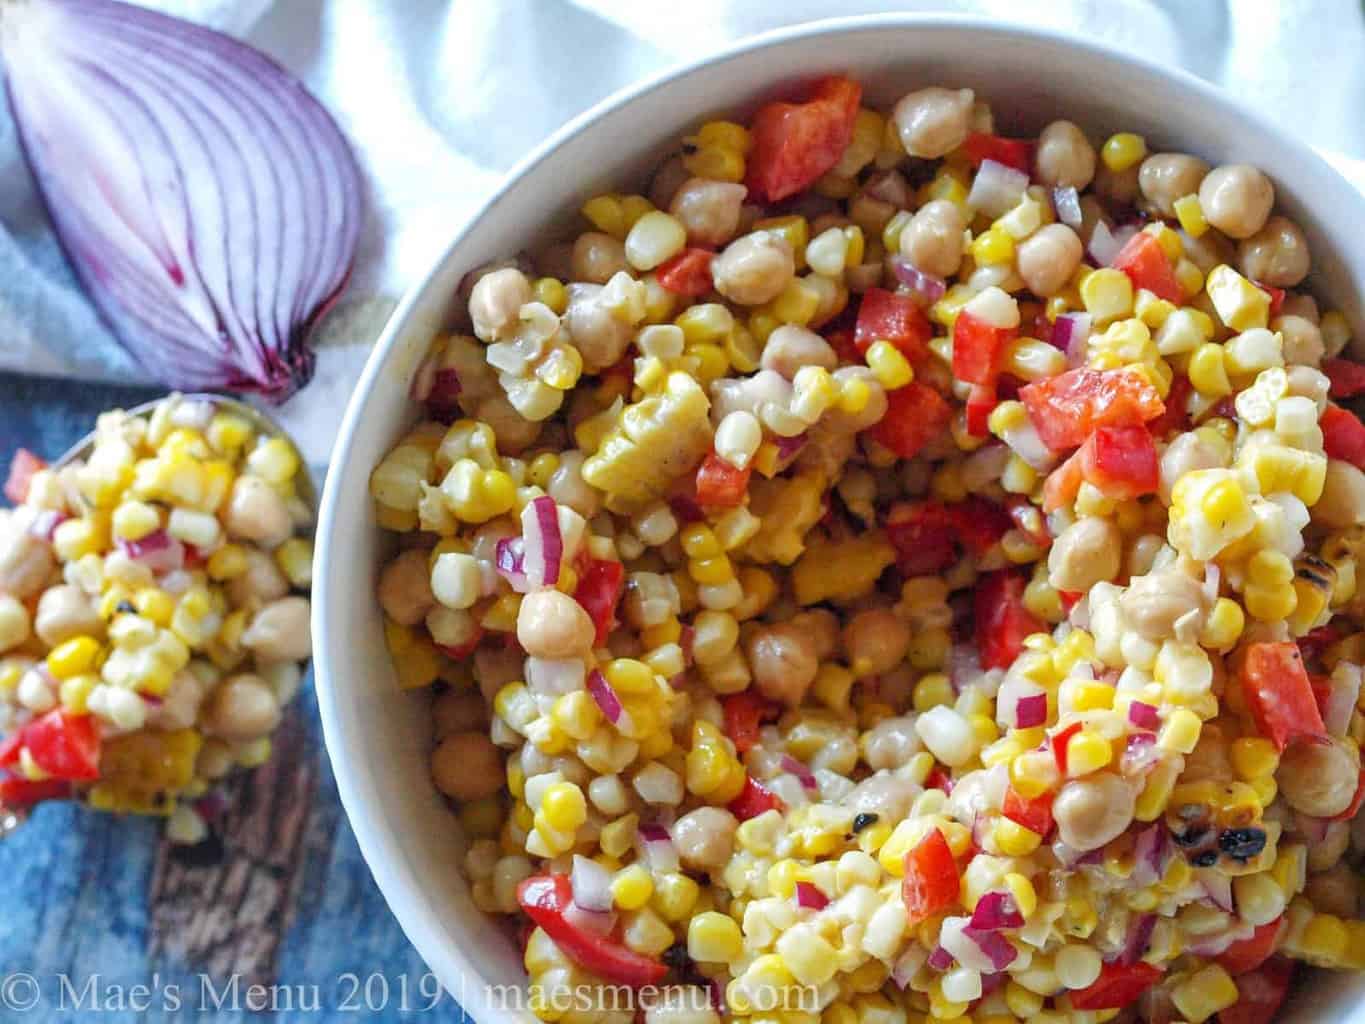 Large white bowl of Chickpea & Grilled Corn Salad with Roasted Garlic Vinaigrette